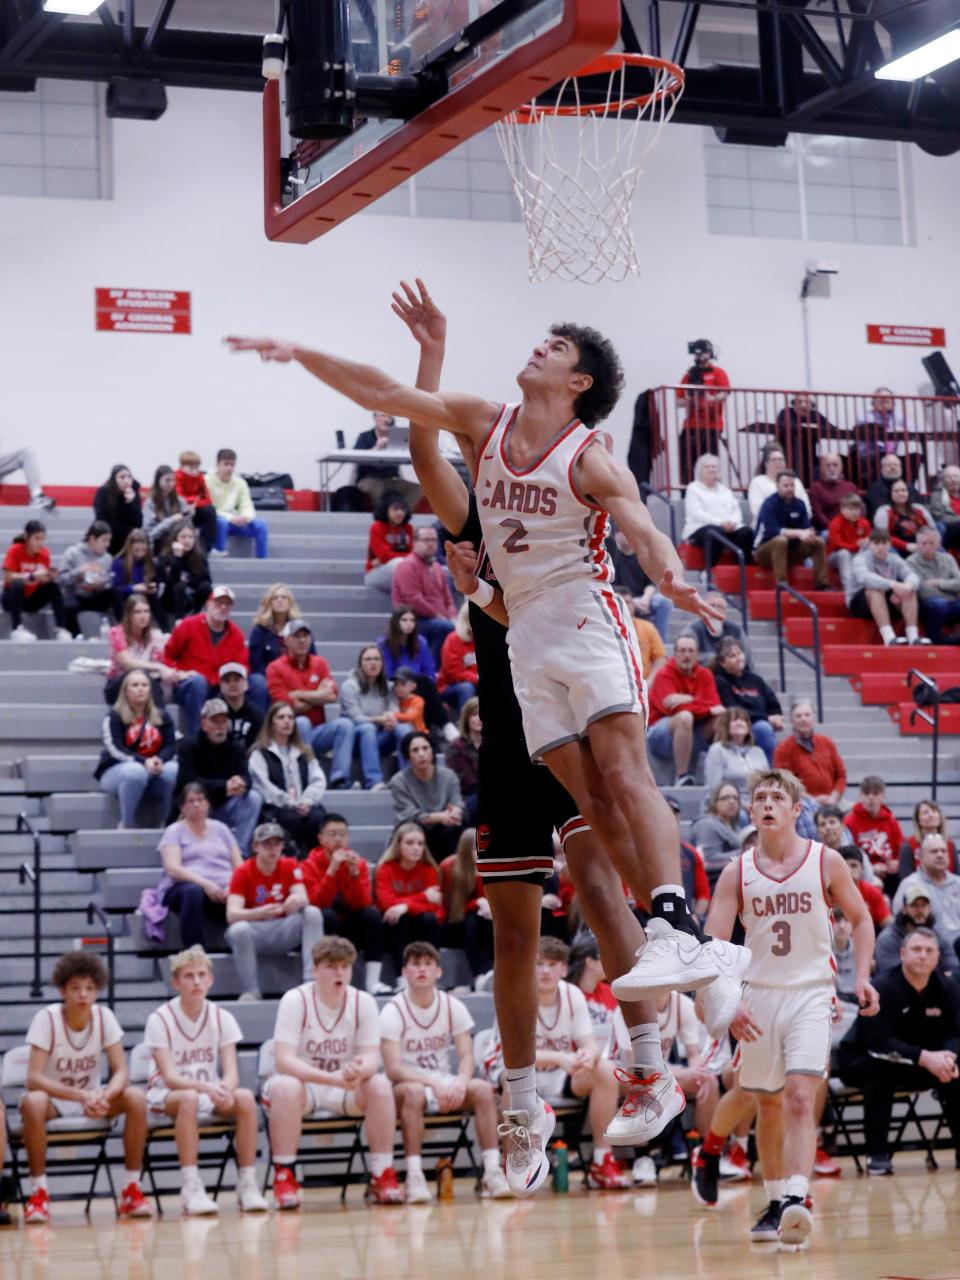 Nick Petro goes up for a block on Alex Taylor, of Coshocton, during Sandy Valley's 47-38 loss in a Division III sectional game on Tuesday night in Sandyville. Coshocton improved to 16-7.